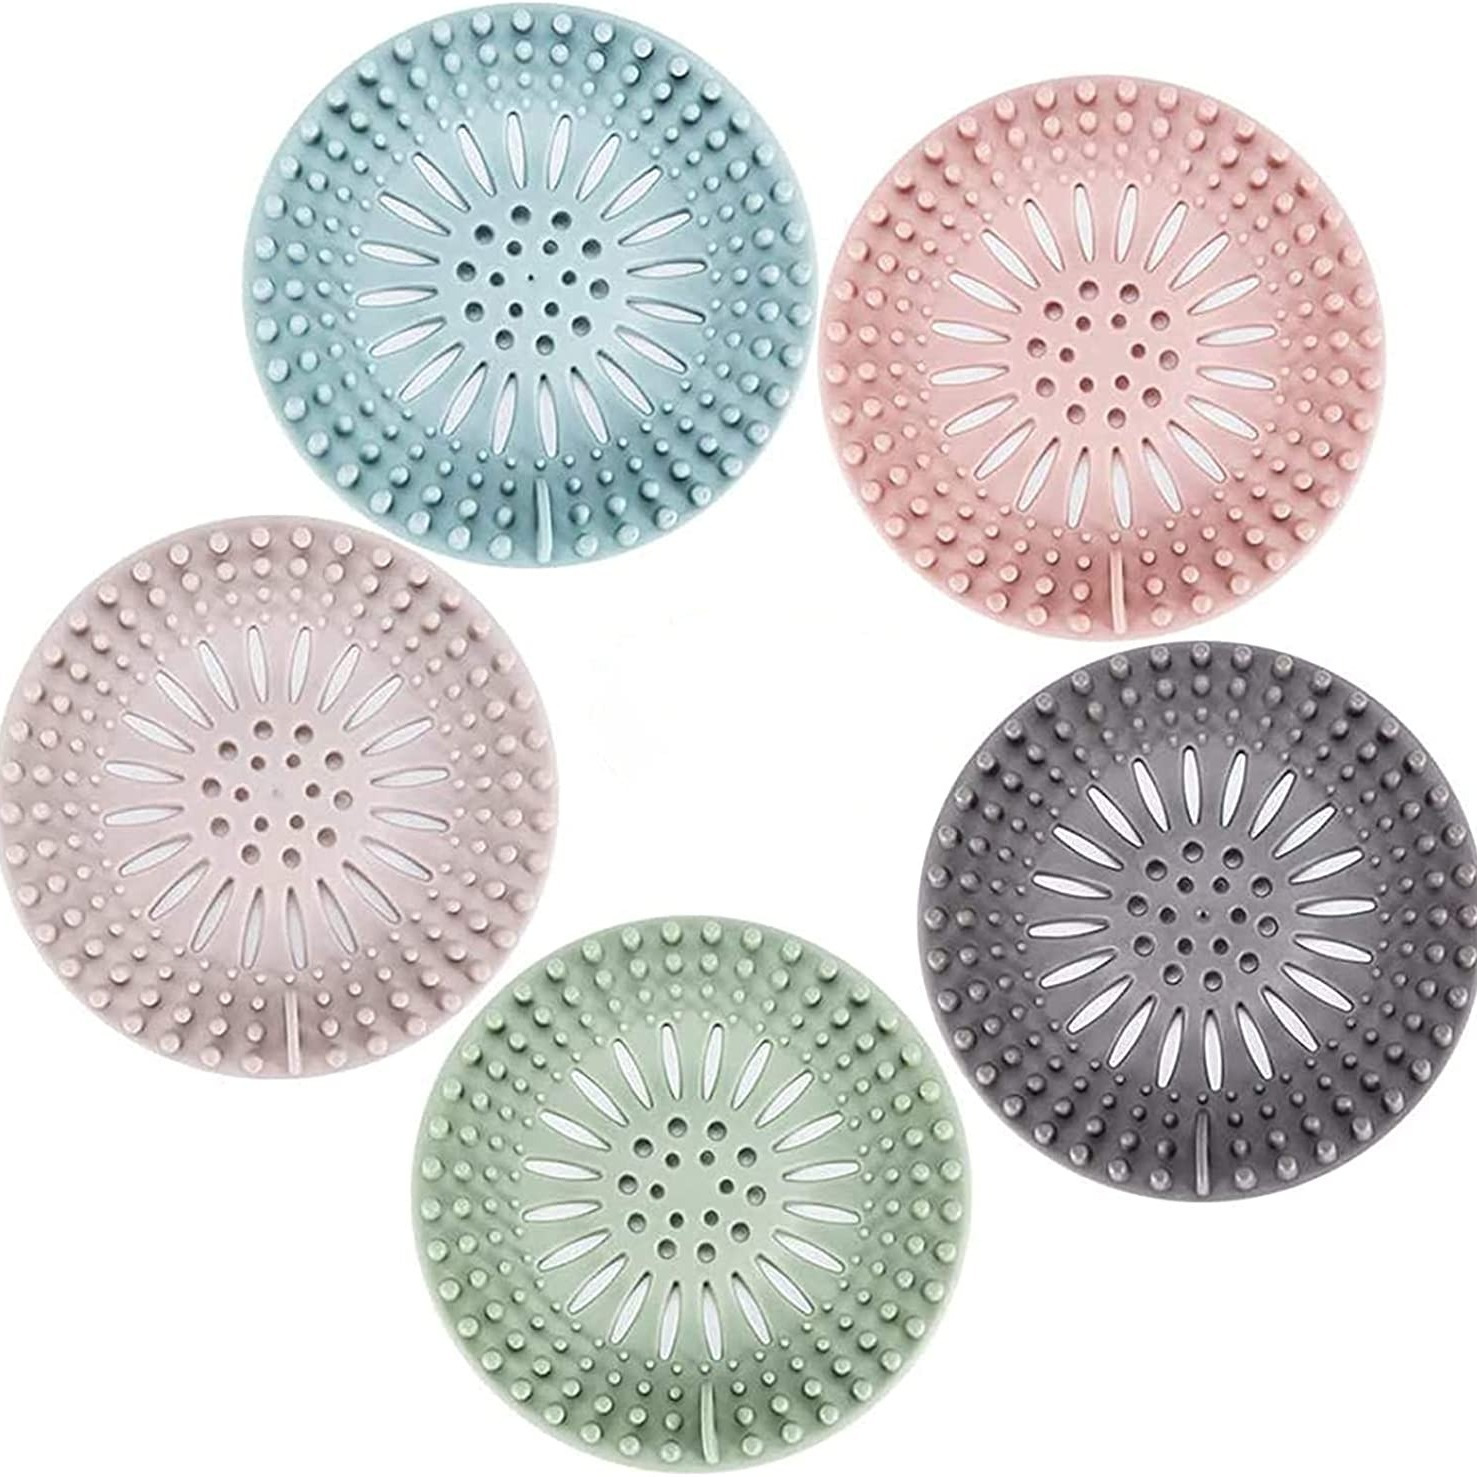 3pack Shower Drain Hair Catcher With Suction Cups, Silicone Foldable Sink  Strainer Protector Drain Cover For Sinks Baths Bathtub Showers